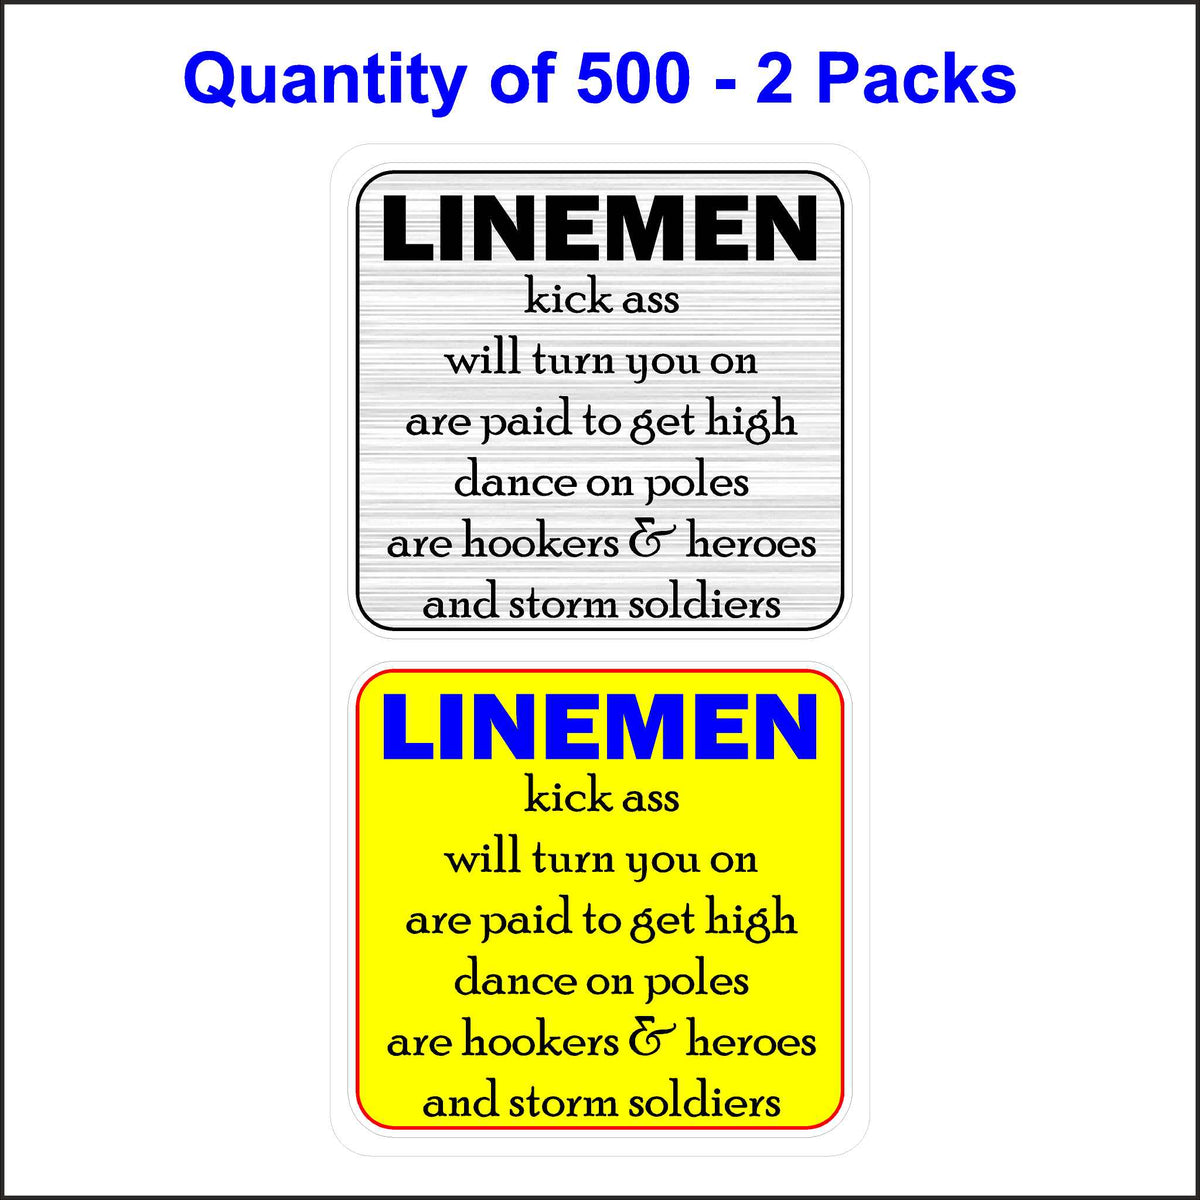 Lineman Kick Ass, Will Turn You On, Are Paid To Get High, Dance On Ploes, Are Hookers And Hero&#39;s and Storm Soldiers Stickers. 500 Quantity